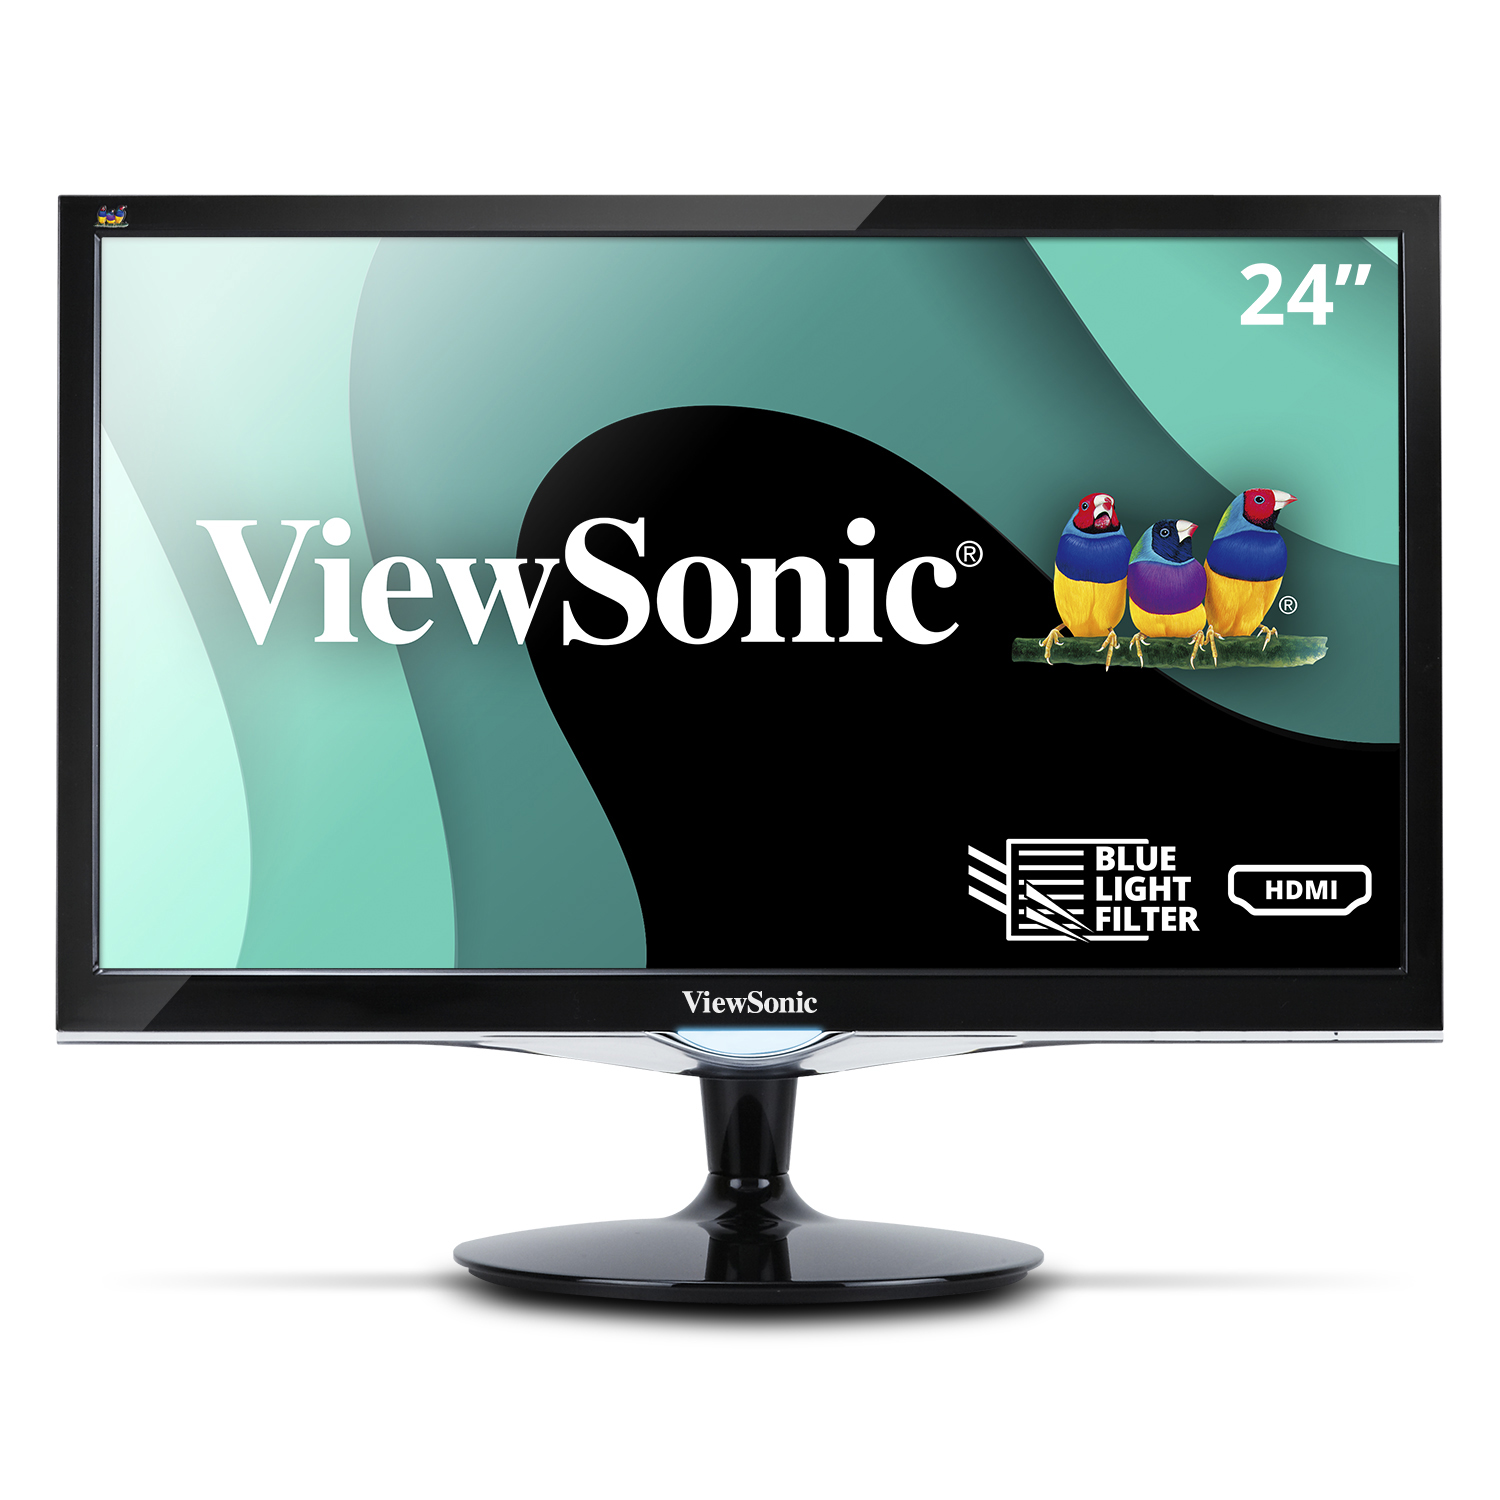 ViewSonic VX2452MH 24 Inch 2ms 60Hz 1080p Gaming Monitor with HDMI DVI and VGA inputs - image 1 of 7